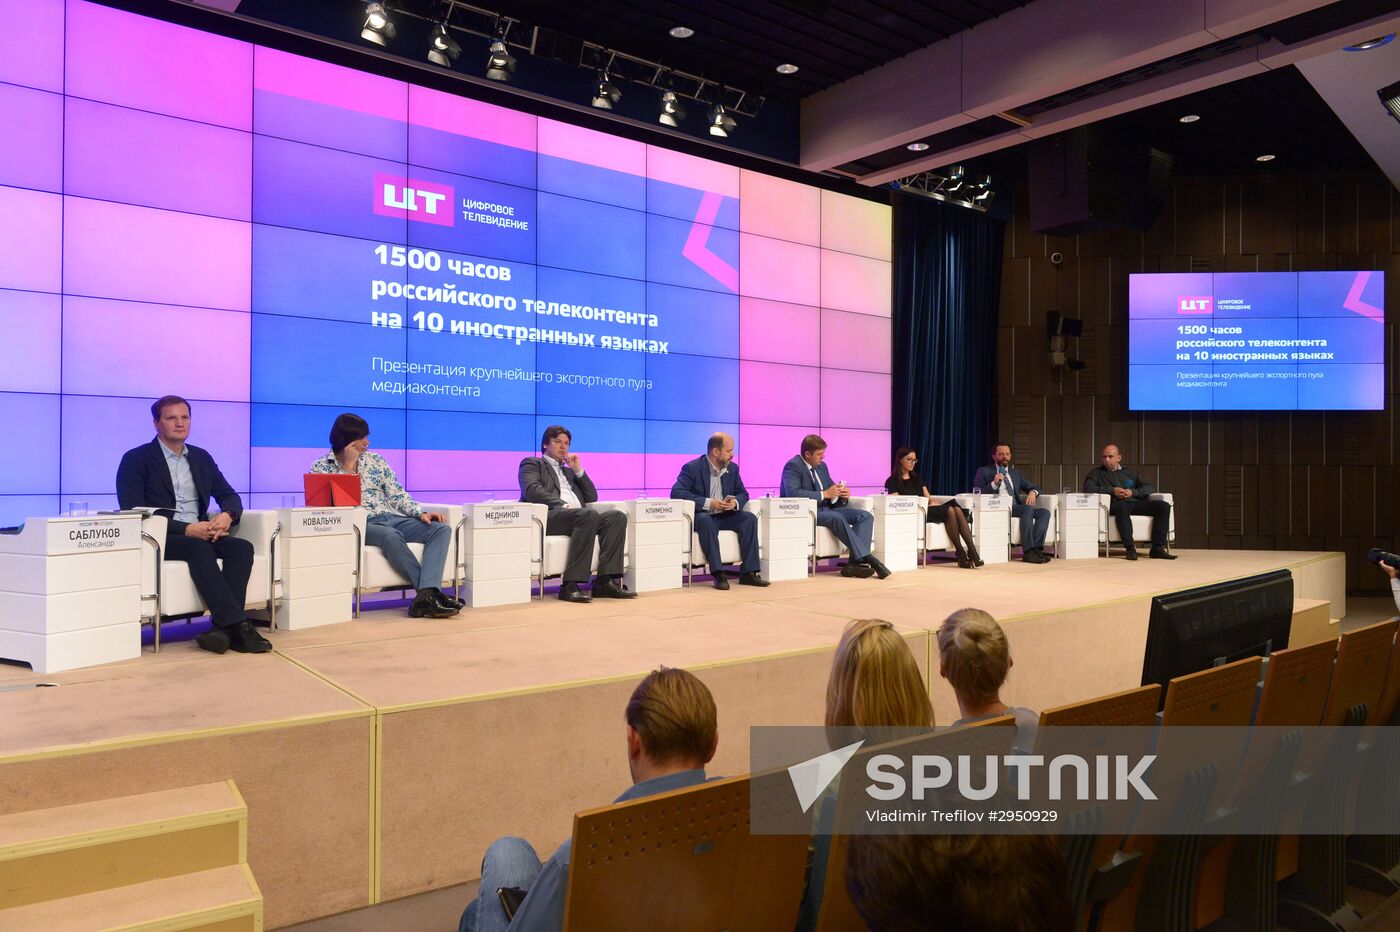 News conference on promoting Russia's media content abroad